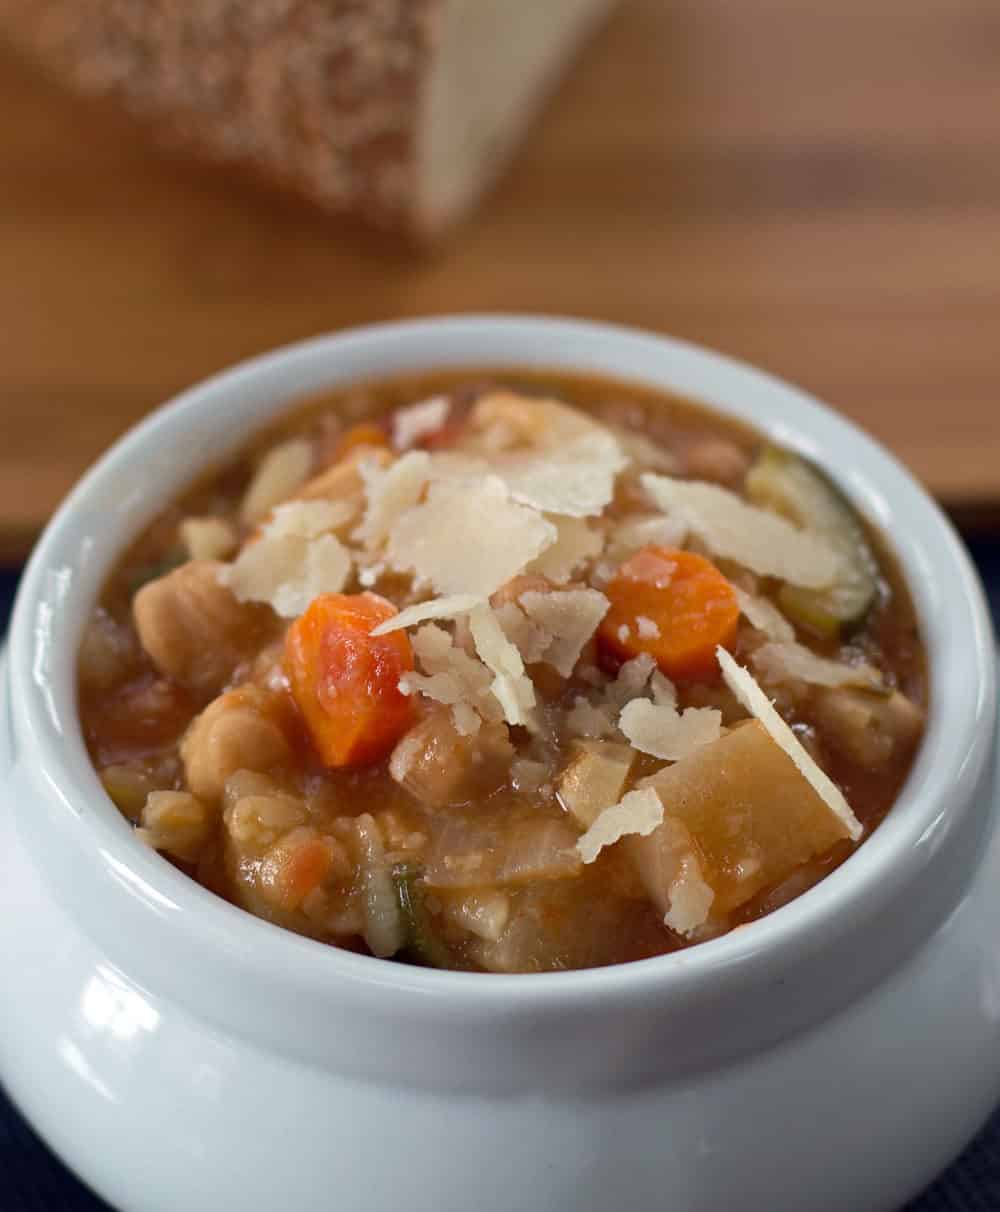 Slow cooker chickpea stew with bread - a perfect cold weather lunch or dinner. 